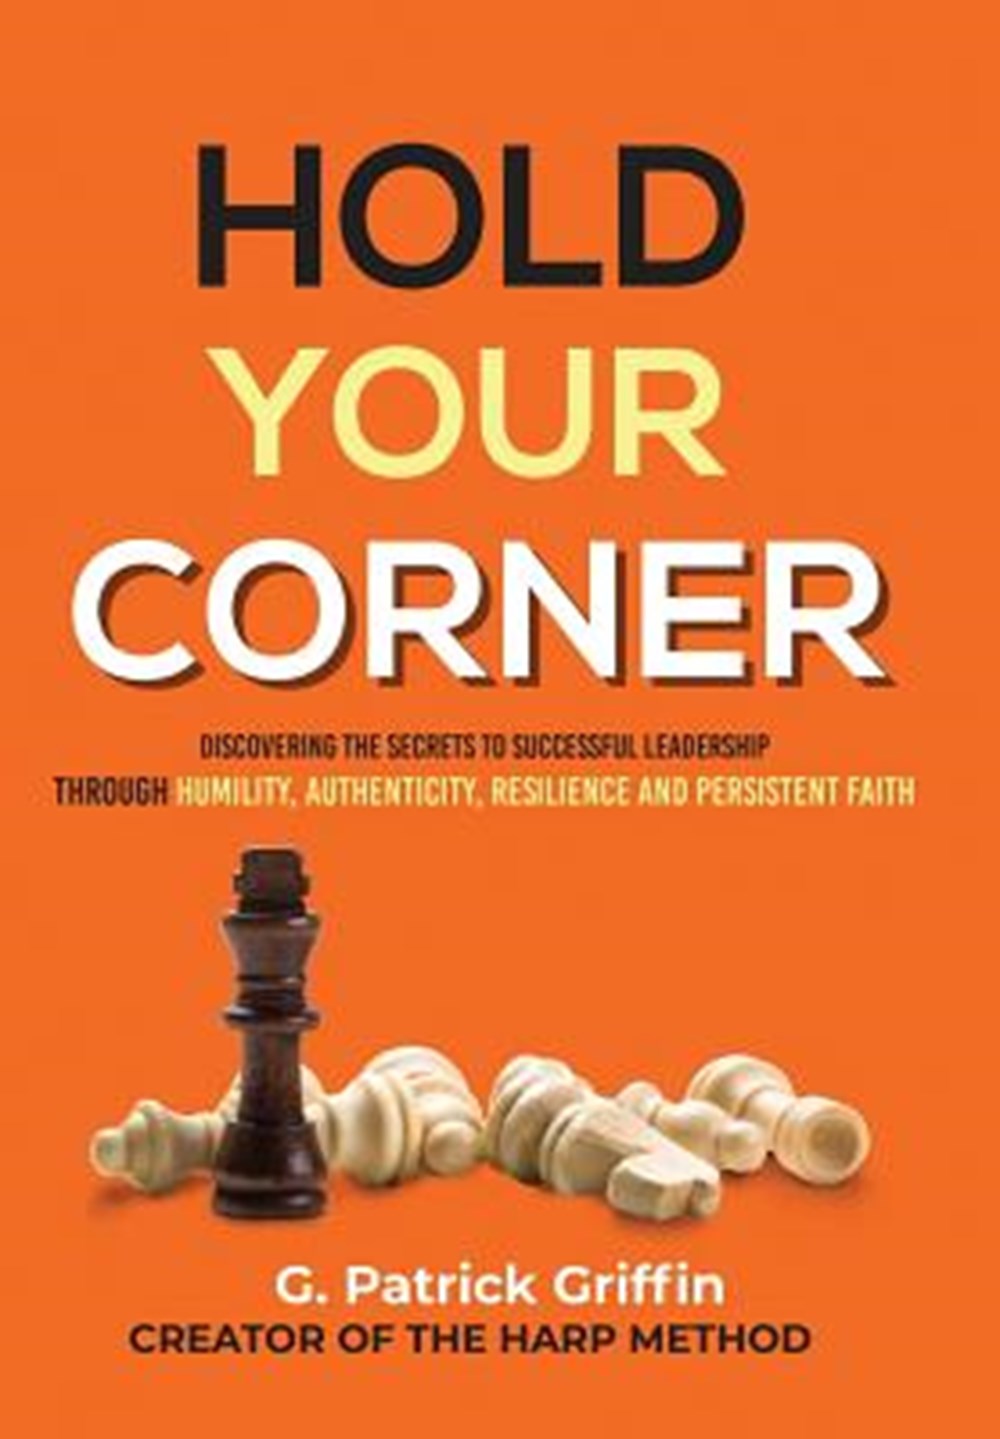 Hold Your Corner Discovering The Secrets To Successful Leadership Through Humility, Authenticity, Re